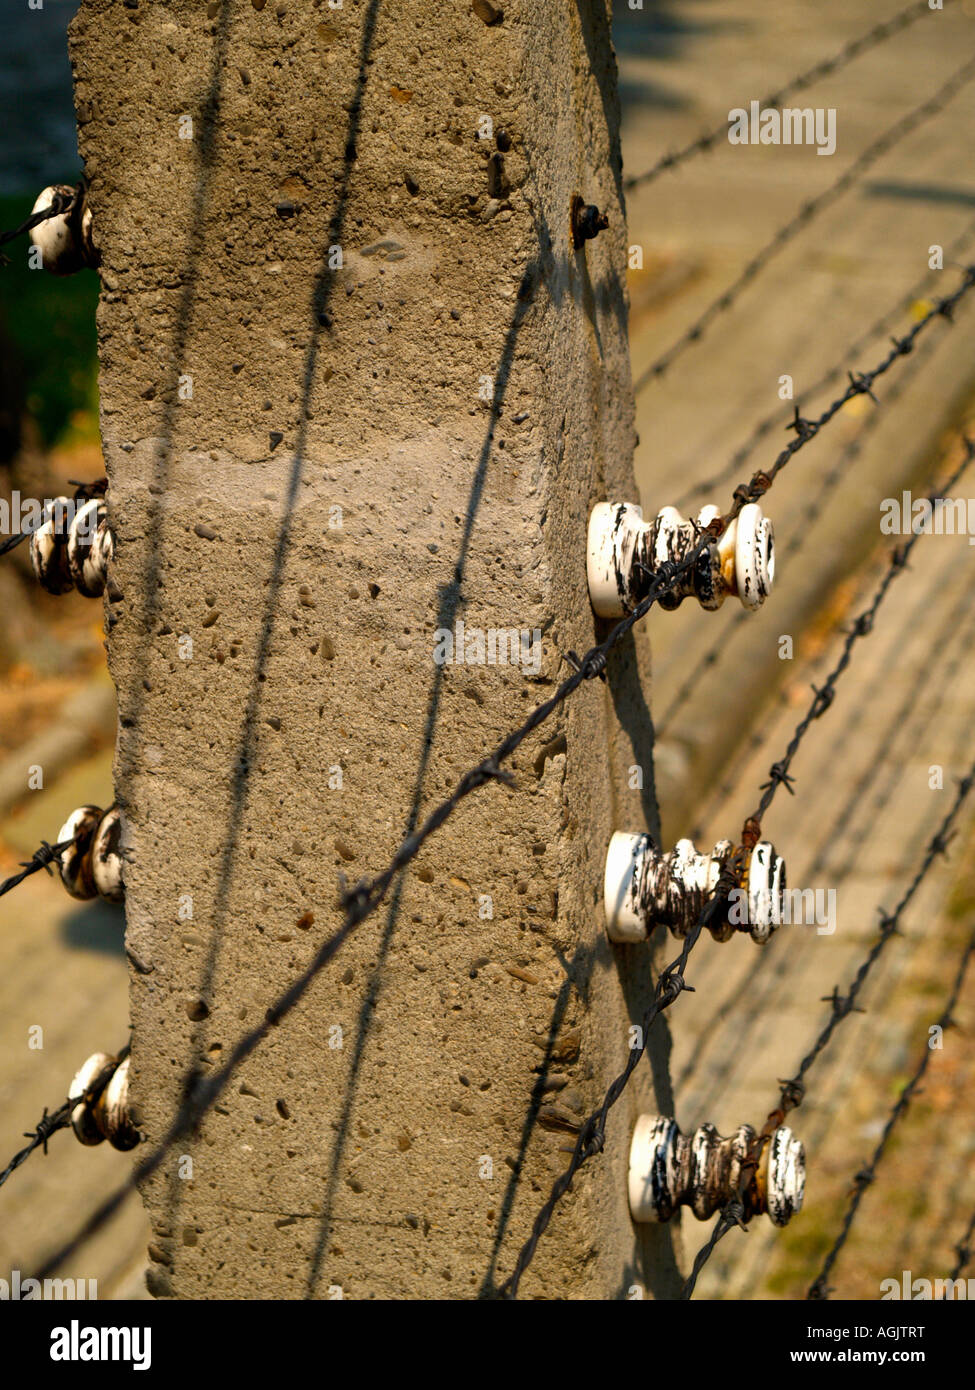 Detail of electrified barbed wire at the Auschwitz concentration camp outside of Krakow, Poland. Stock Photo